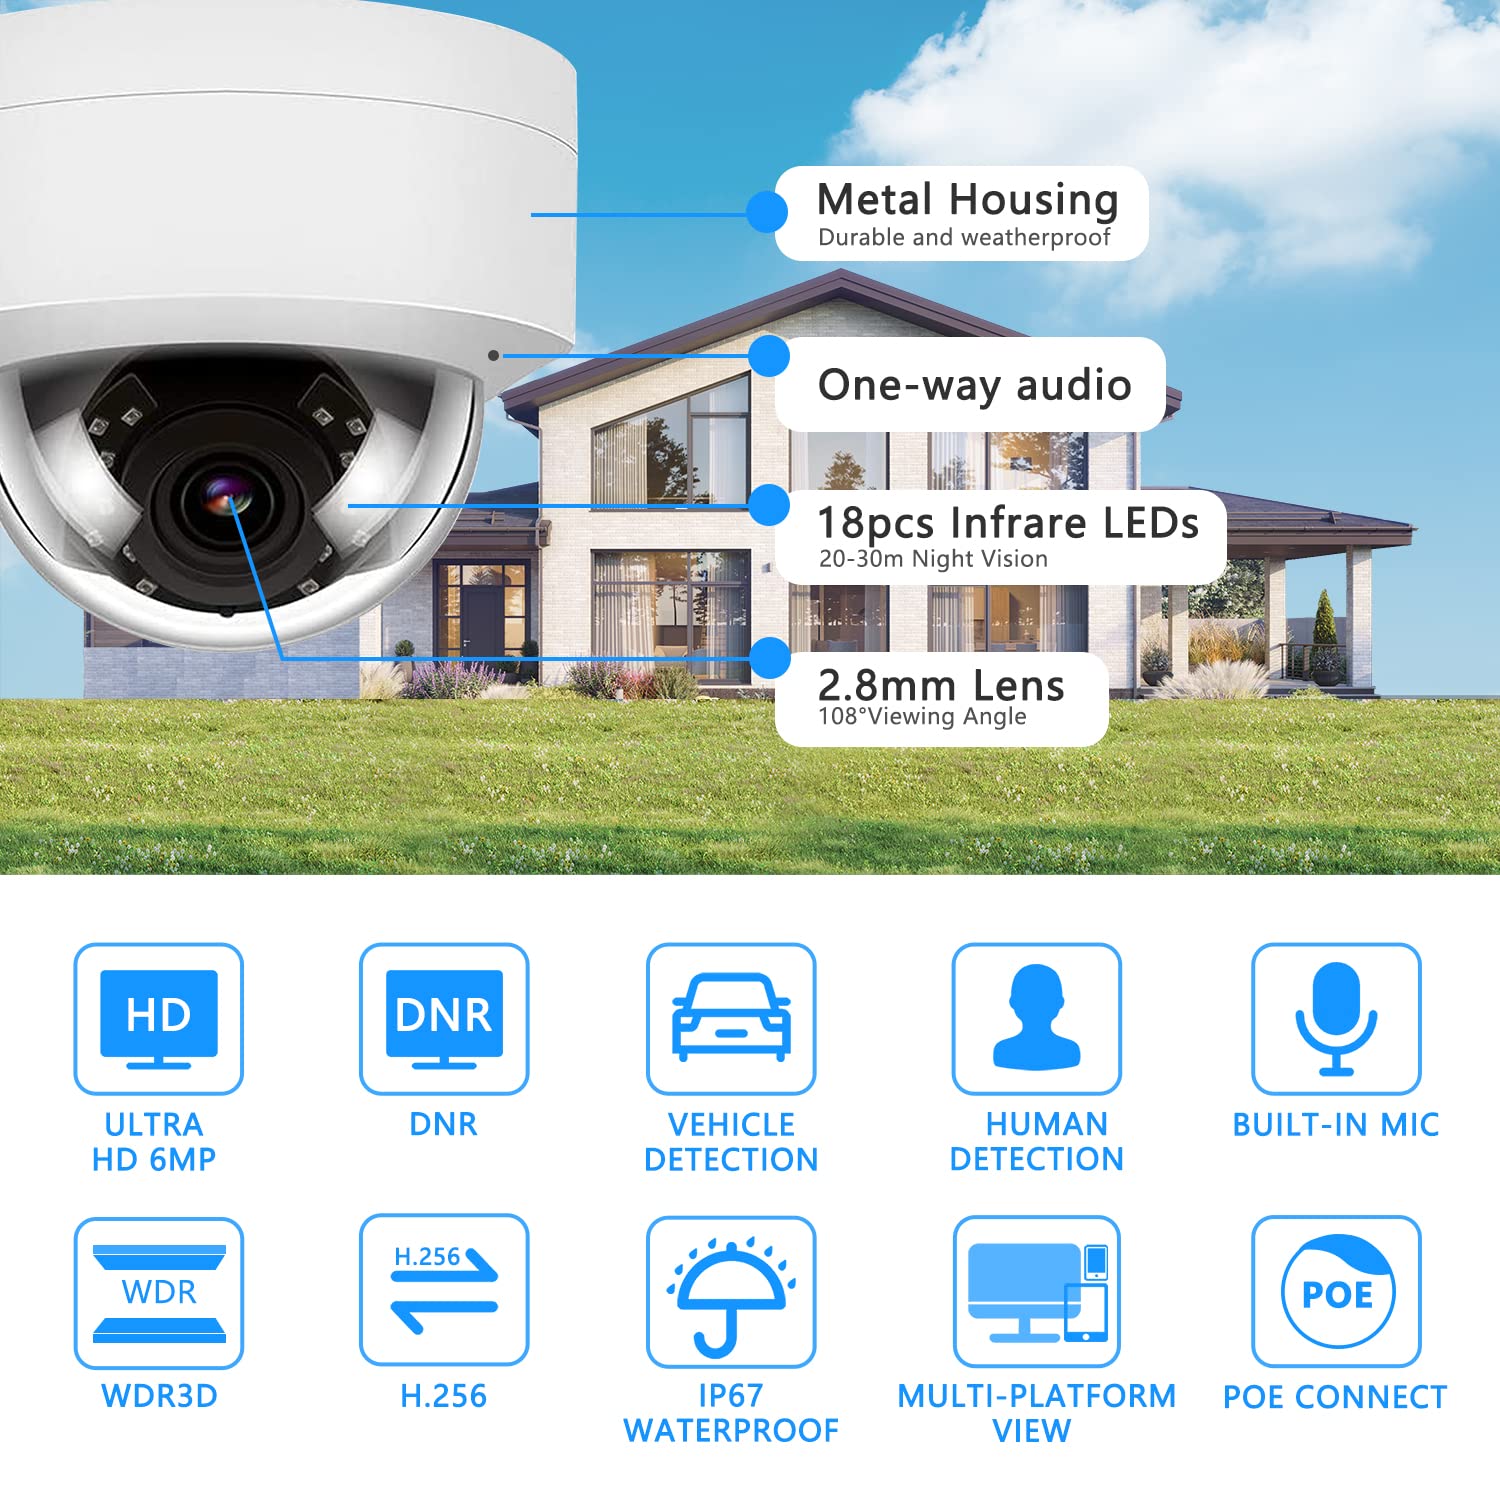 Real HD 6MP PoE IP Vandal Dome Security Camera Outdoor, 2.8mm, H.265, IP67 IK10, Built-in Microphone Audio, Bundle with DS-1258ZJ LTB348 WM110 Wall Mount Bracket, Compatible with Hikvision